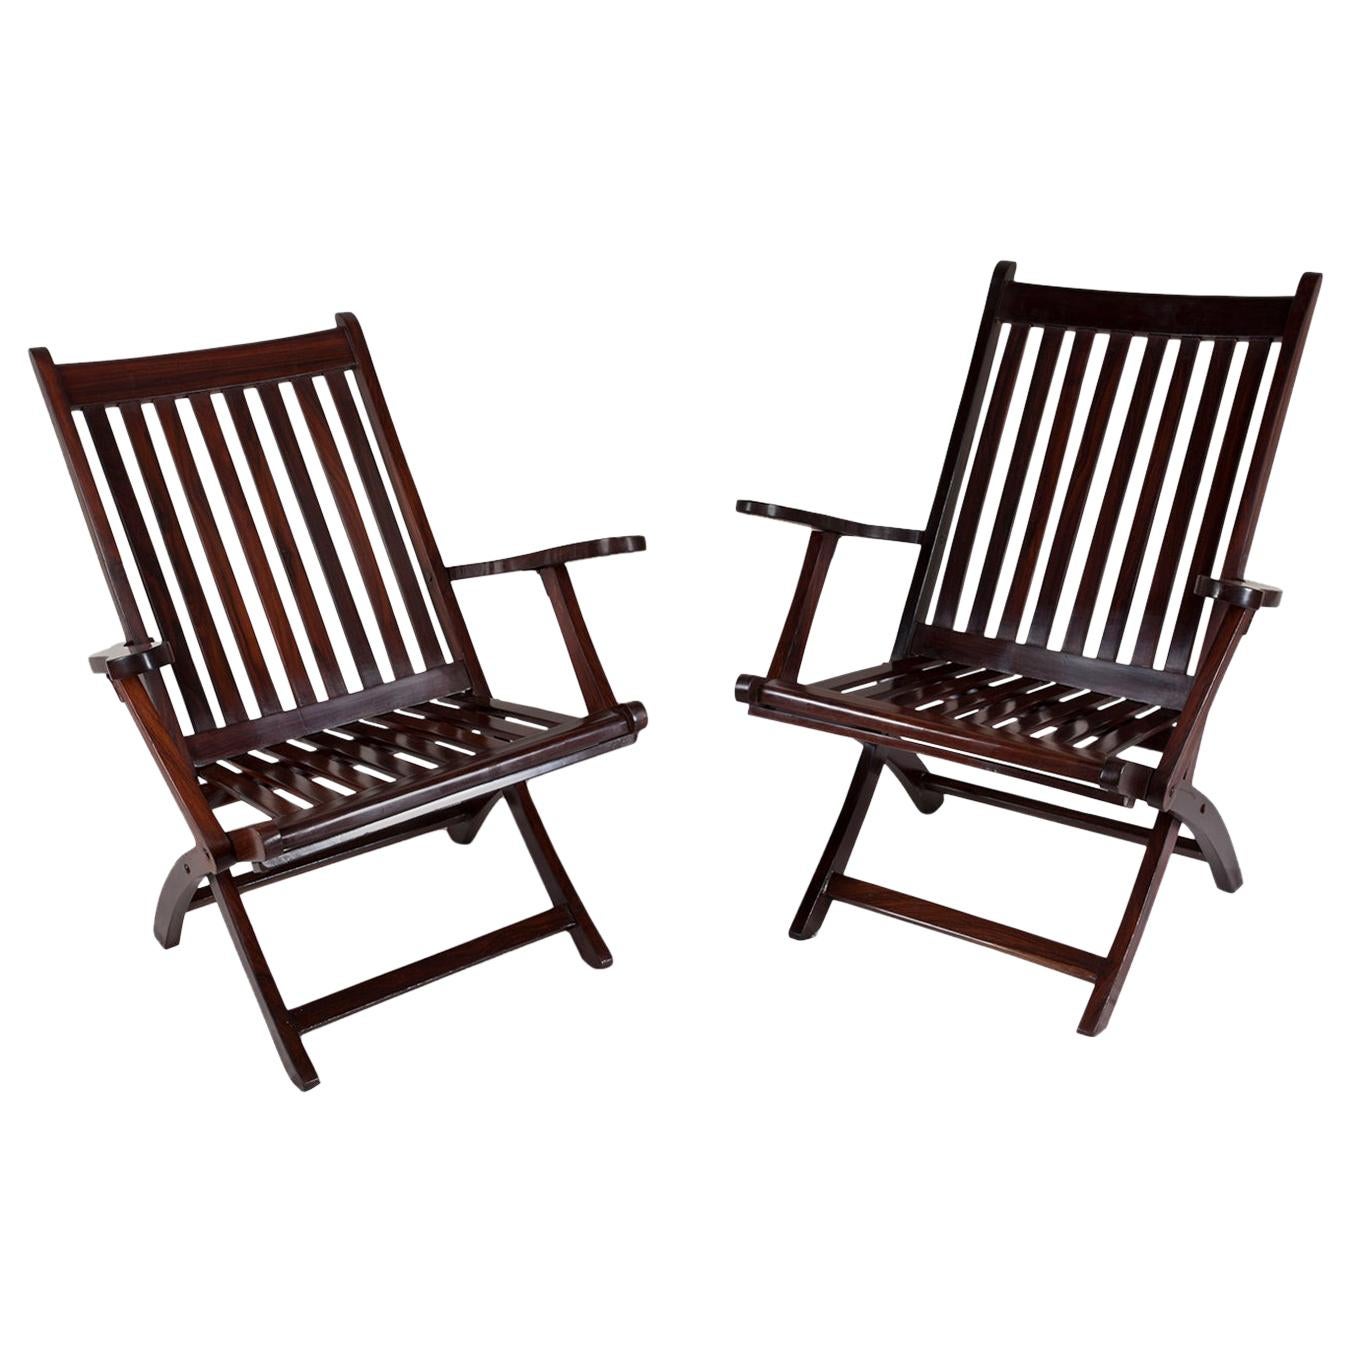 Pair of 1930s Rosewood Deck or Side Chairs, British